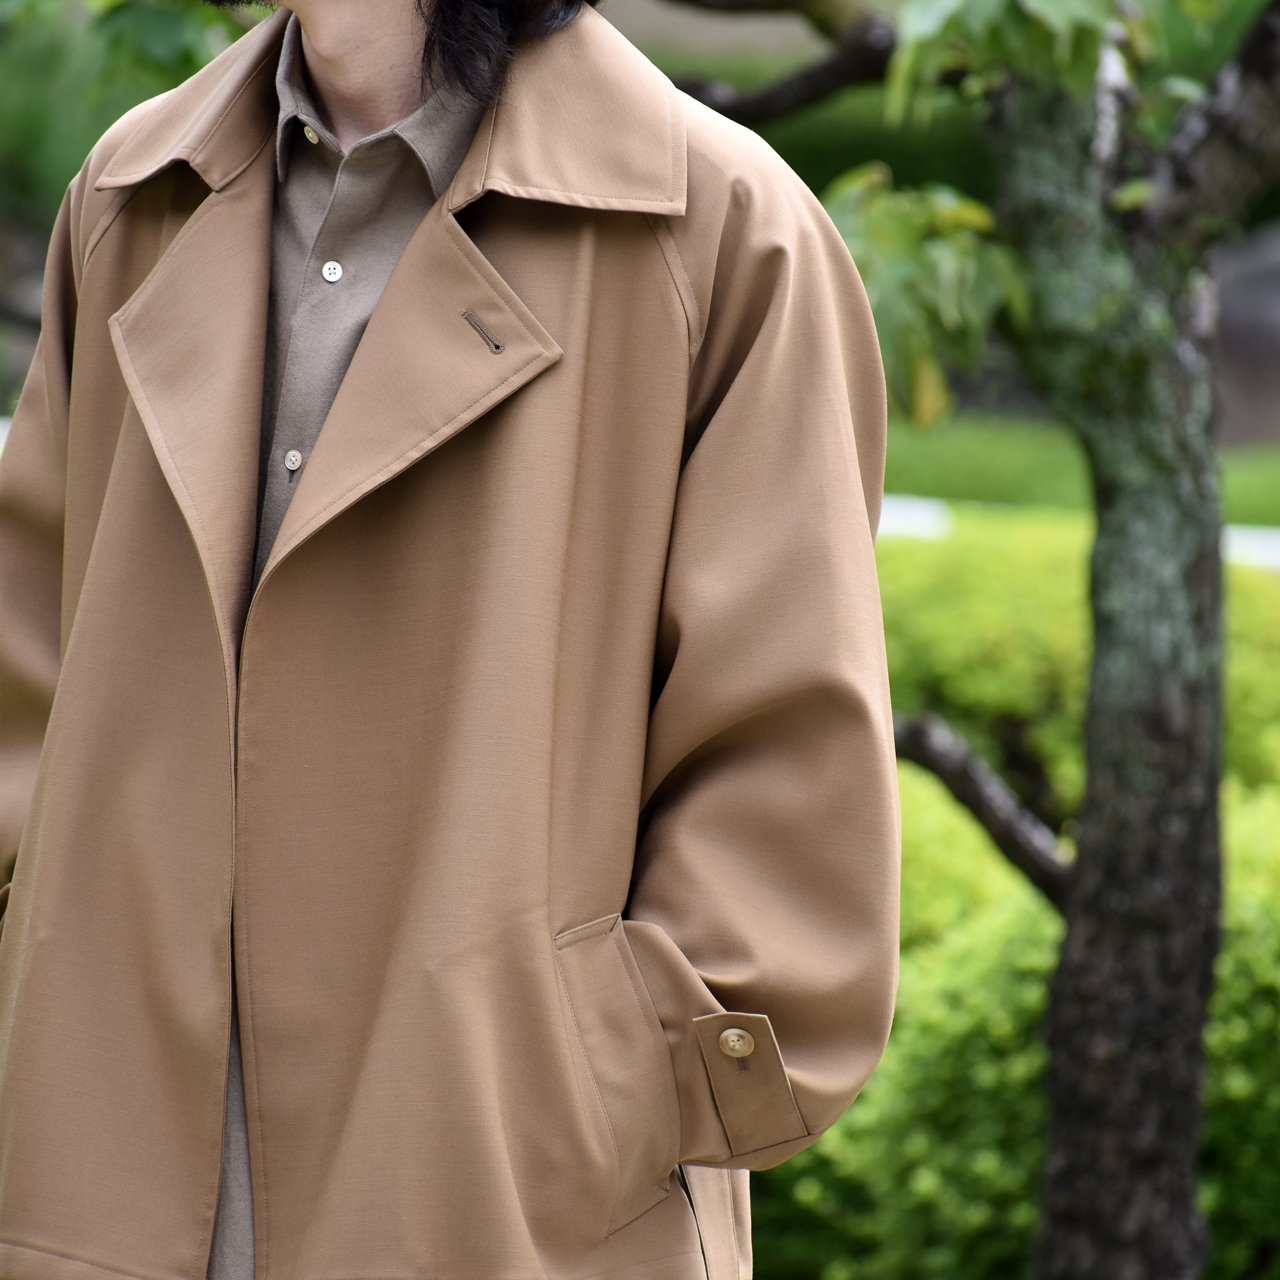 Blanc YM short trench coat・gray 22AW | myglobaltax.com